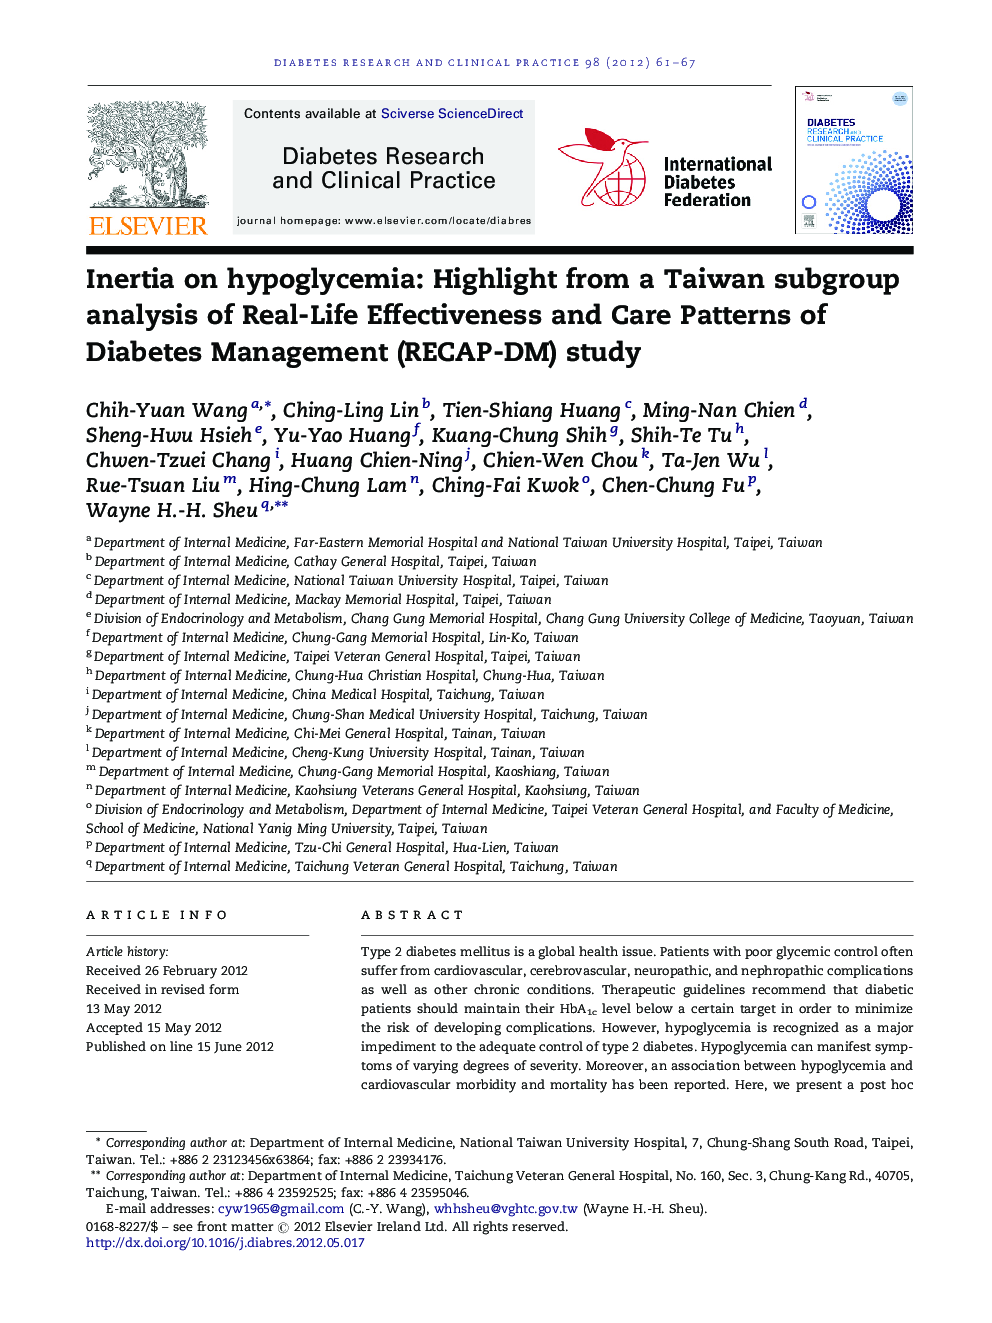 Inertia on hypoglycemia: Highlight from a Taiwan subgroup analysis of Real-Life Effectiveness and Care Patterns of Diabetes Management (RECAP-DM) study